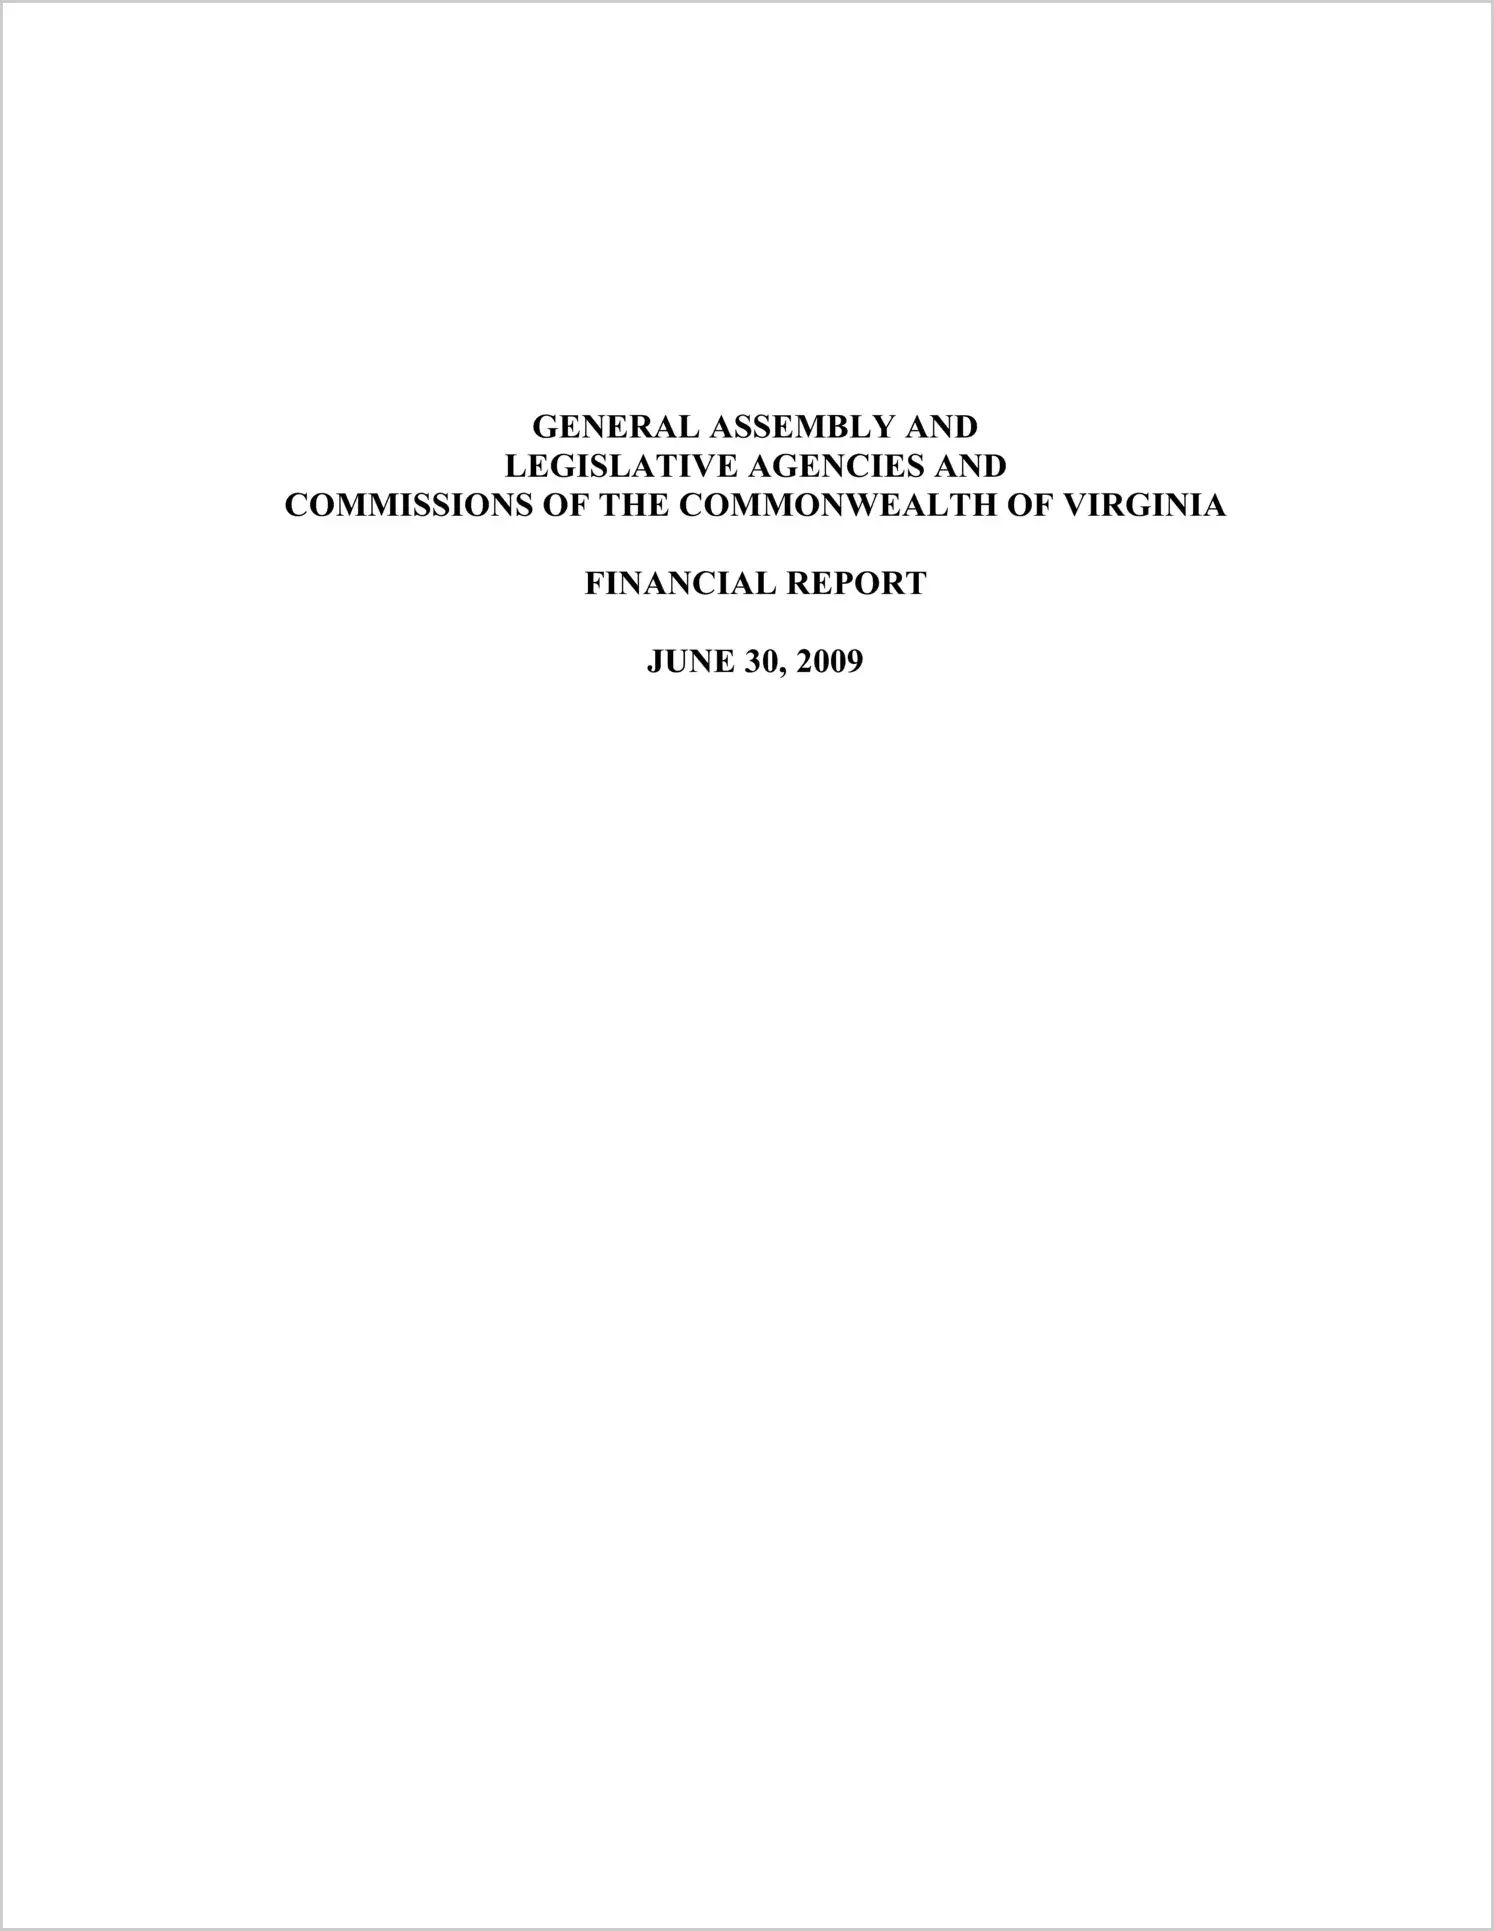 General Assembly and Legislative Agencies and Commissions of the Commonwealth of Virginia Financial Report For The Fiscal Year ended June 30, 2009